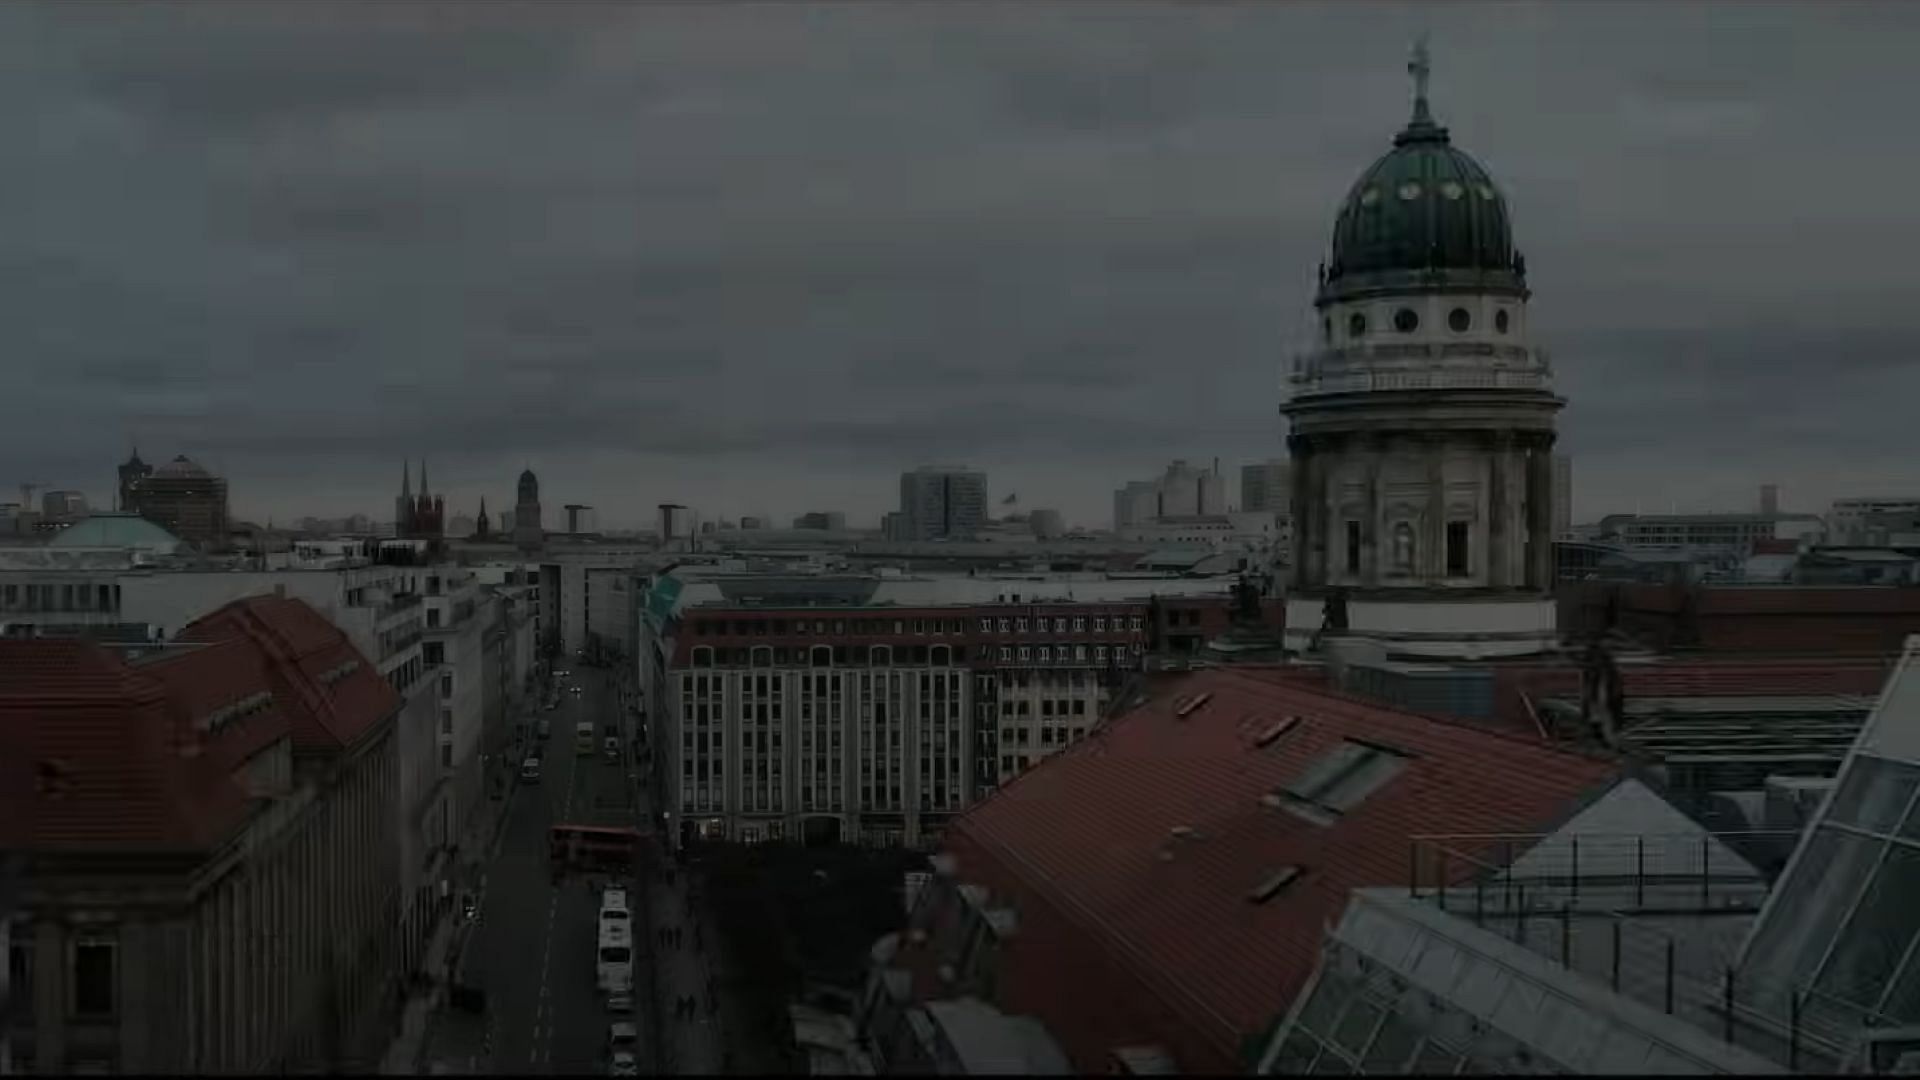 A still from the film featuring urban Berlin (image via Vertical)